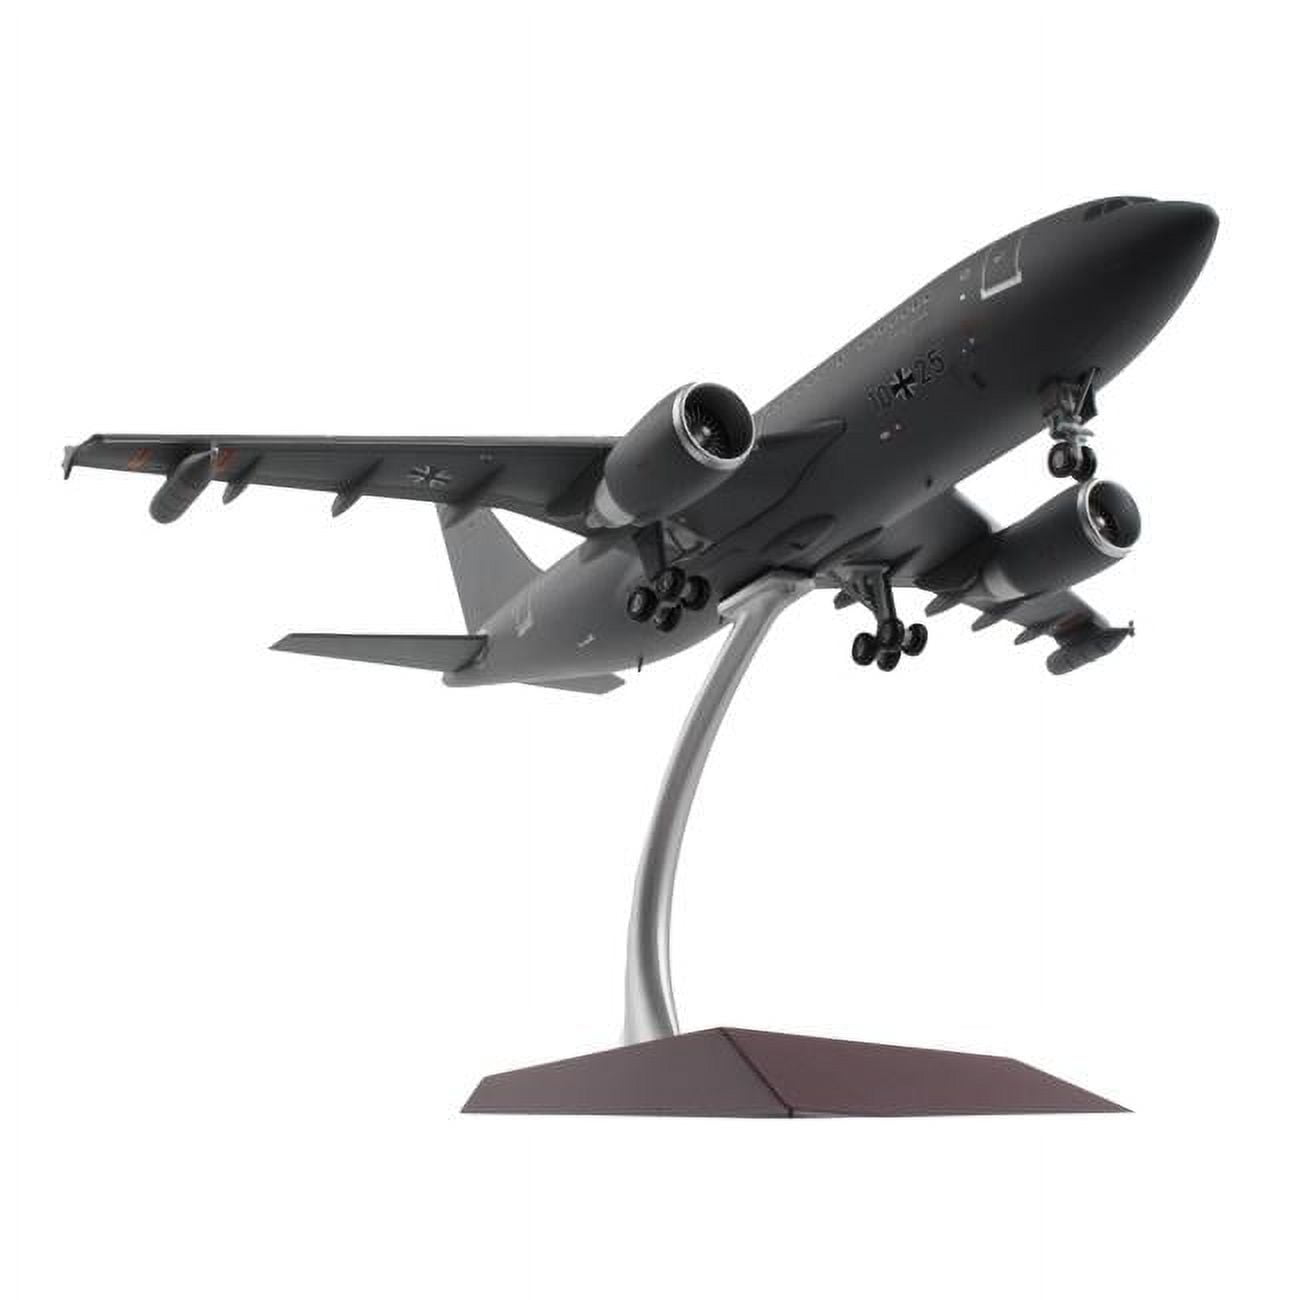 Picture of GeminiJets G2GAF863 Airbus A310 MRTT Tanker Aircraft Luftwaffe Germany Air Force Gemini 200 Series 1-200 Scale Diecast Model Airplane